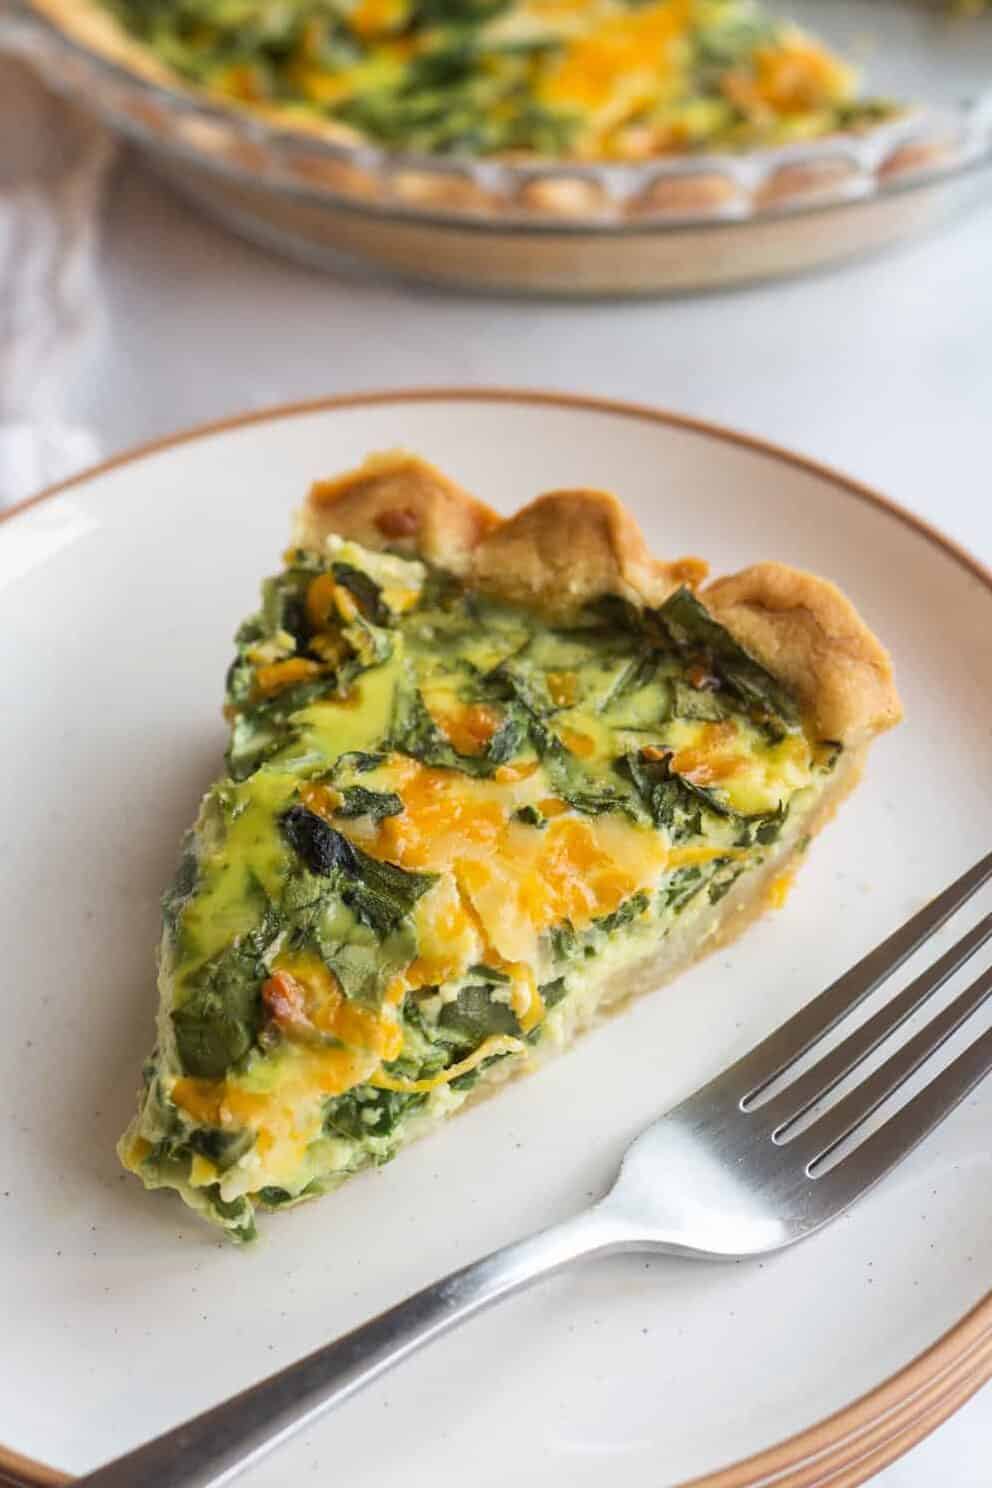 slice of spinach and cheese quiche served on a plate with a silver fork